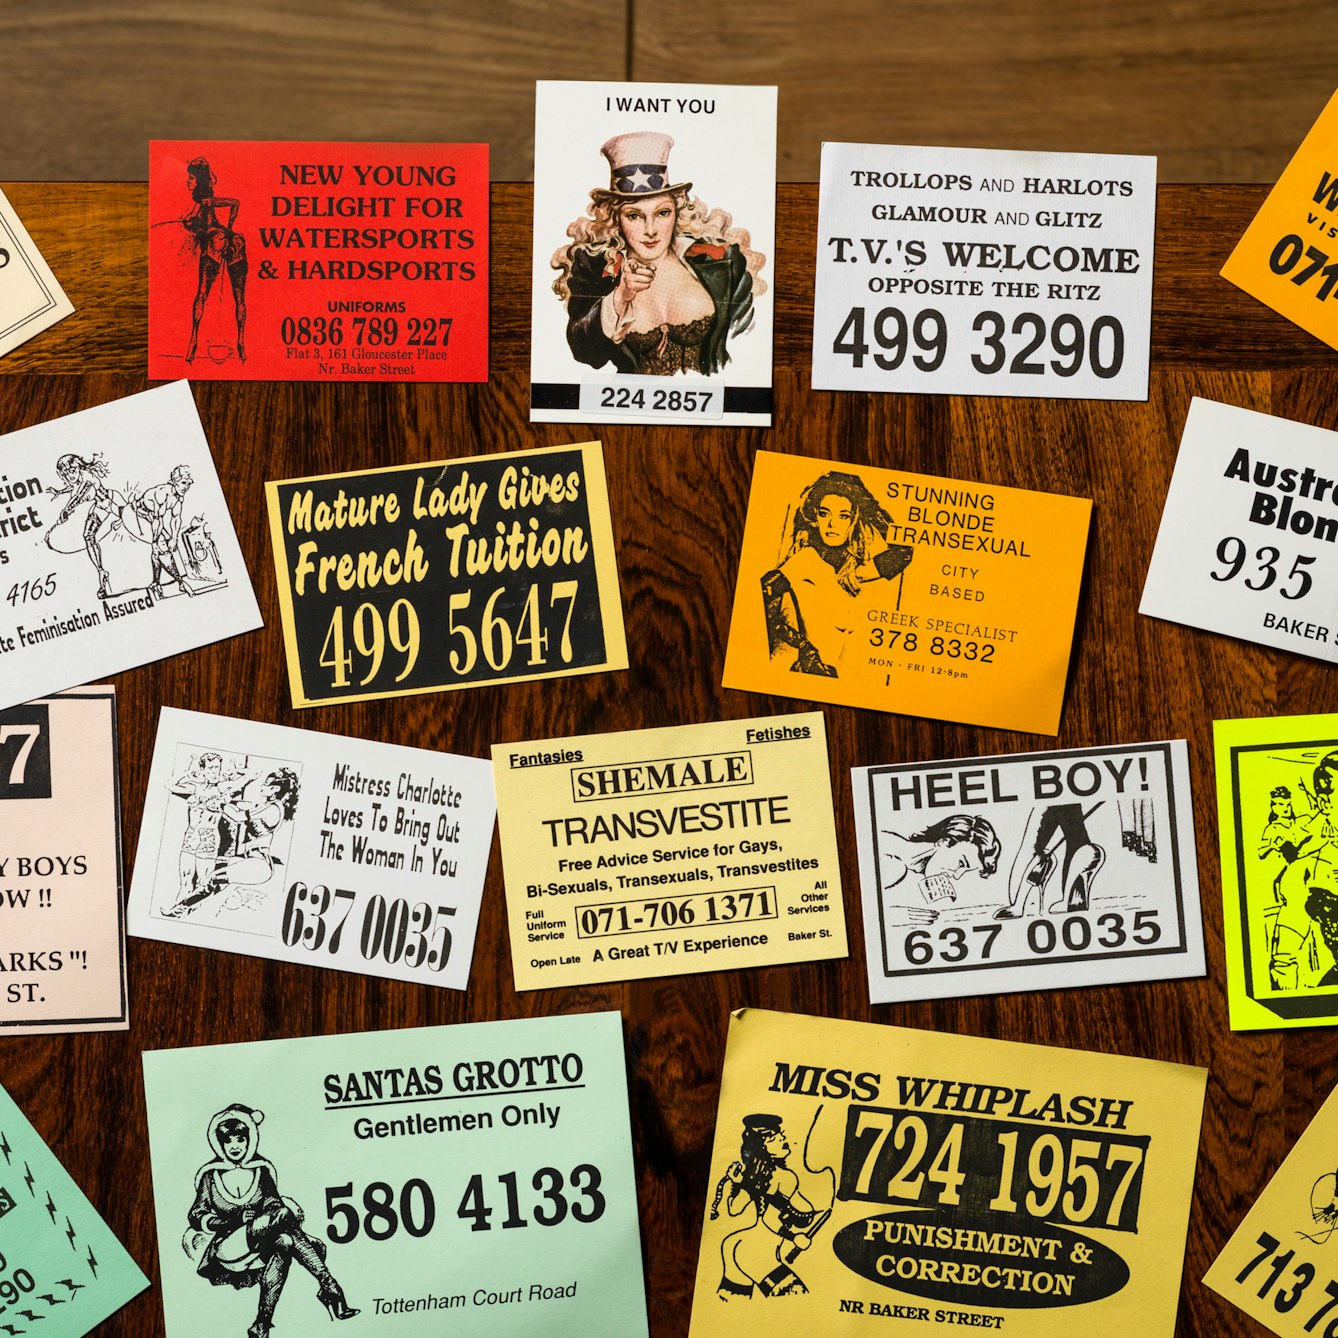 Photograph of a selection of cards from the sex worker card collection at Wellcome Collection, laid out on a wooden tabletop.